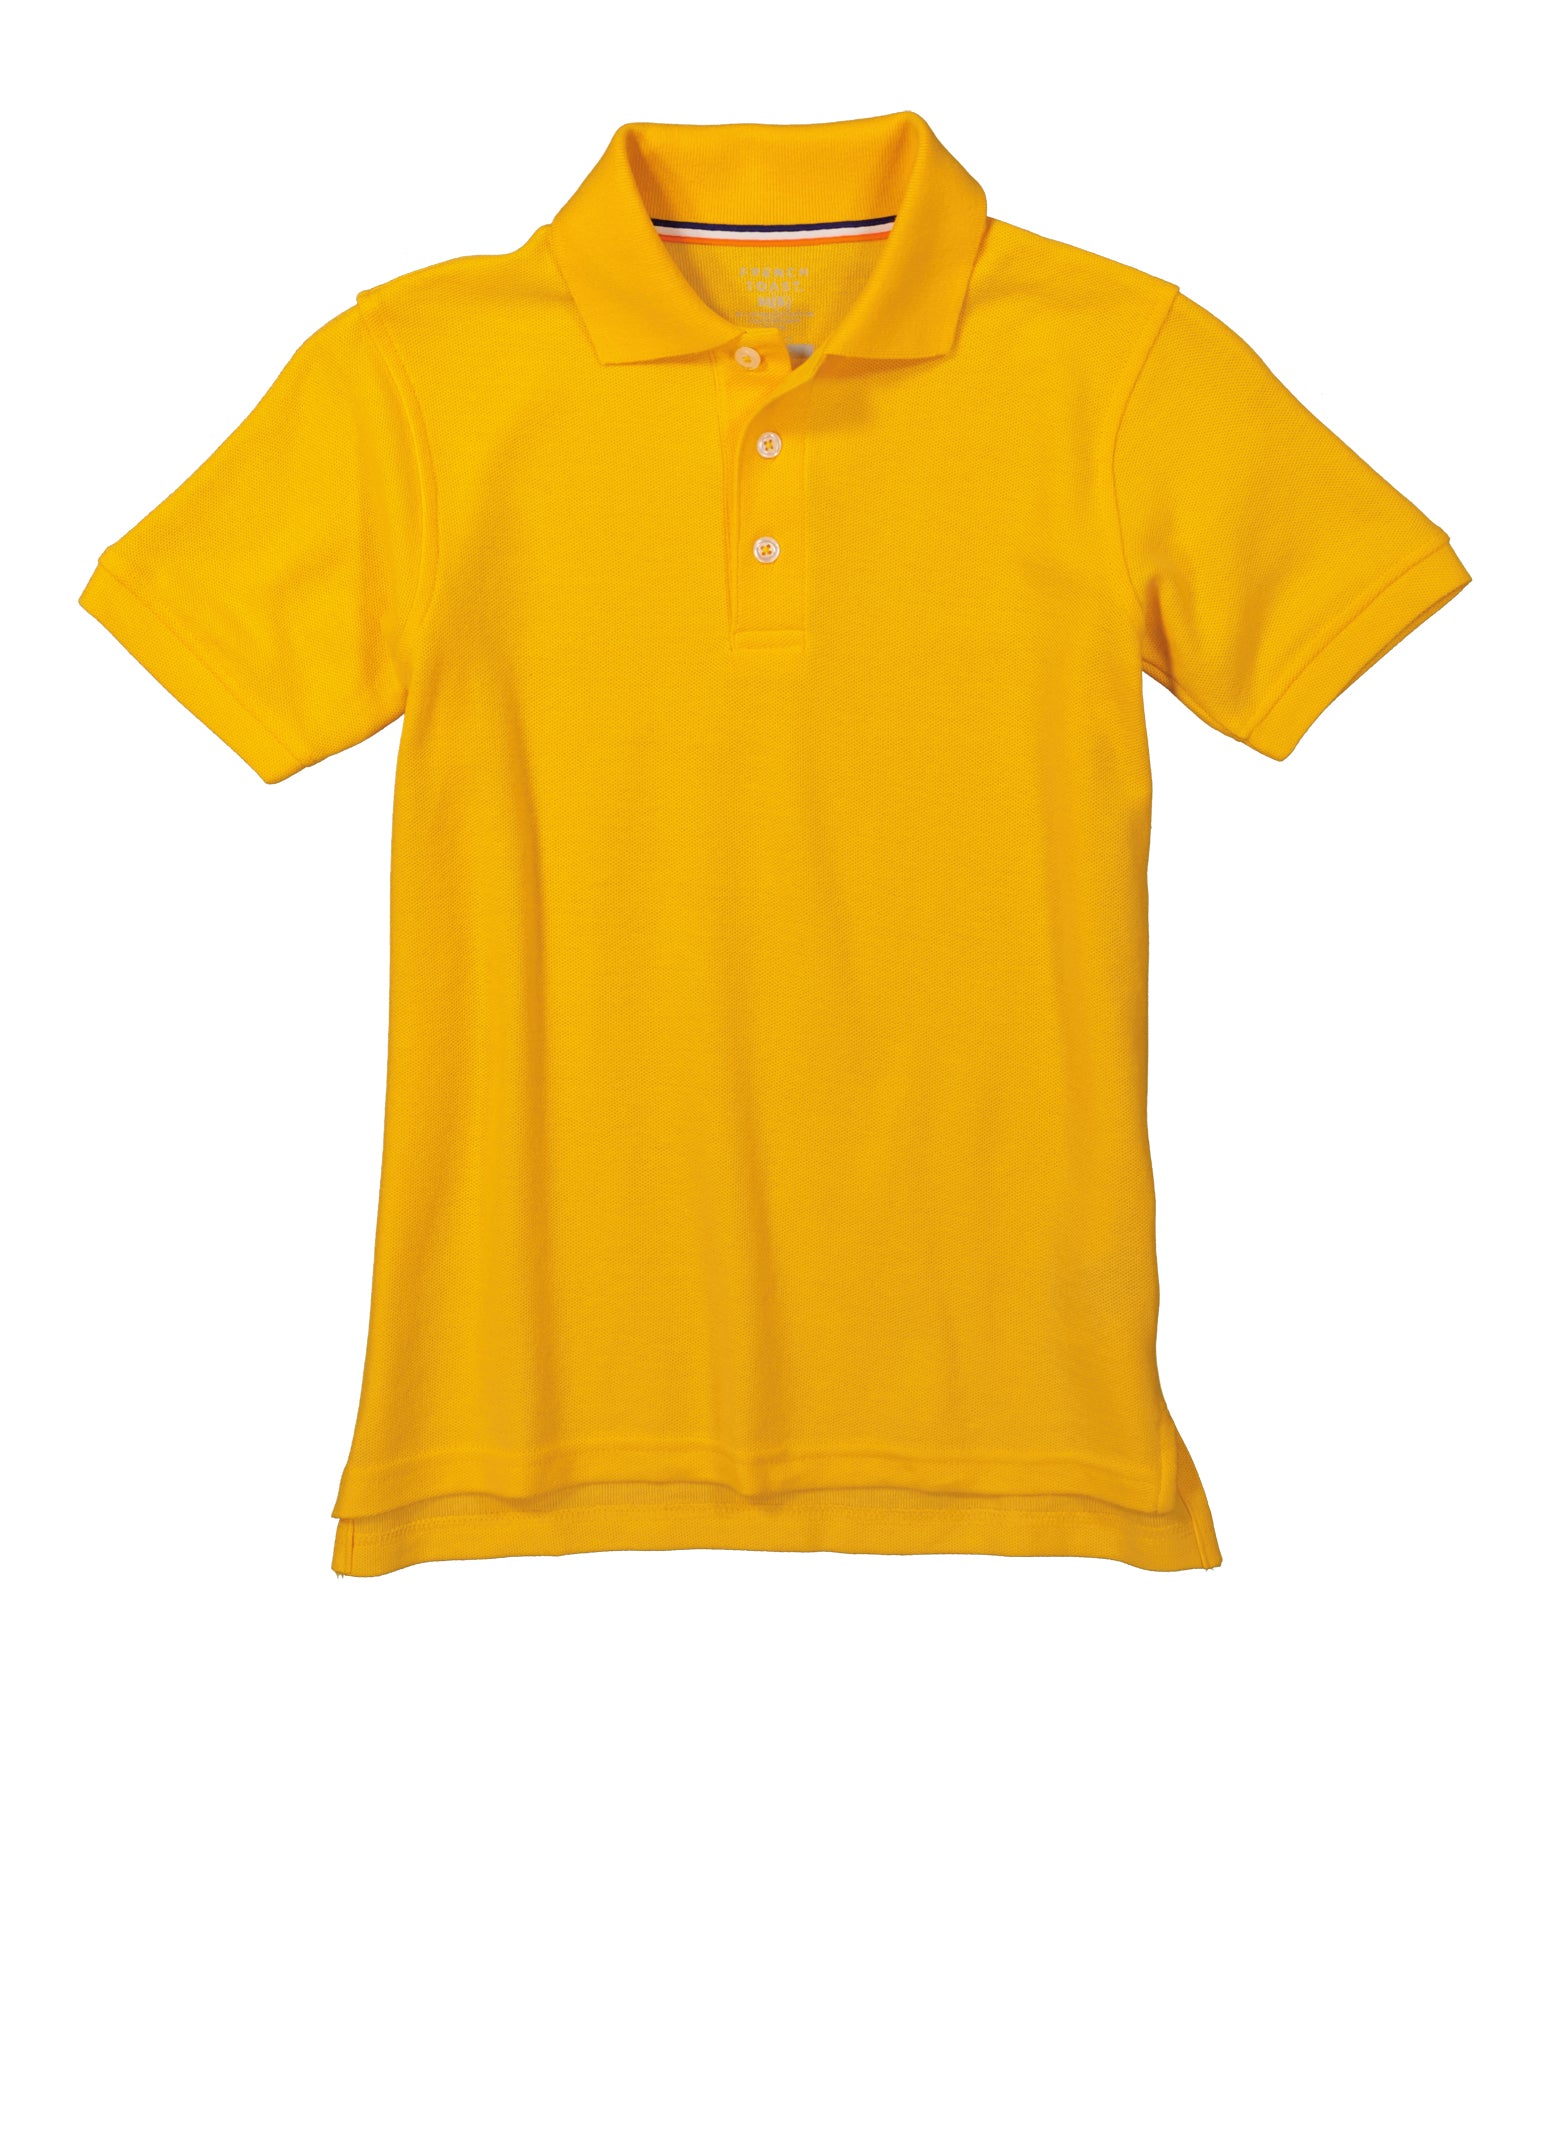 French Toast Boys 8-16 Solid Pique Polo Shirt, Yellow, Size 10-12